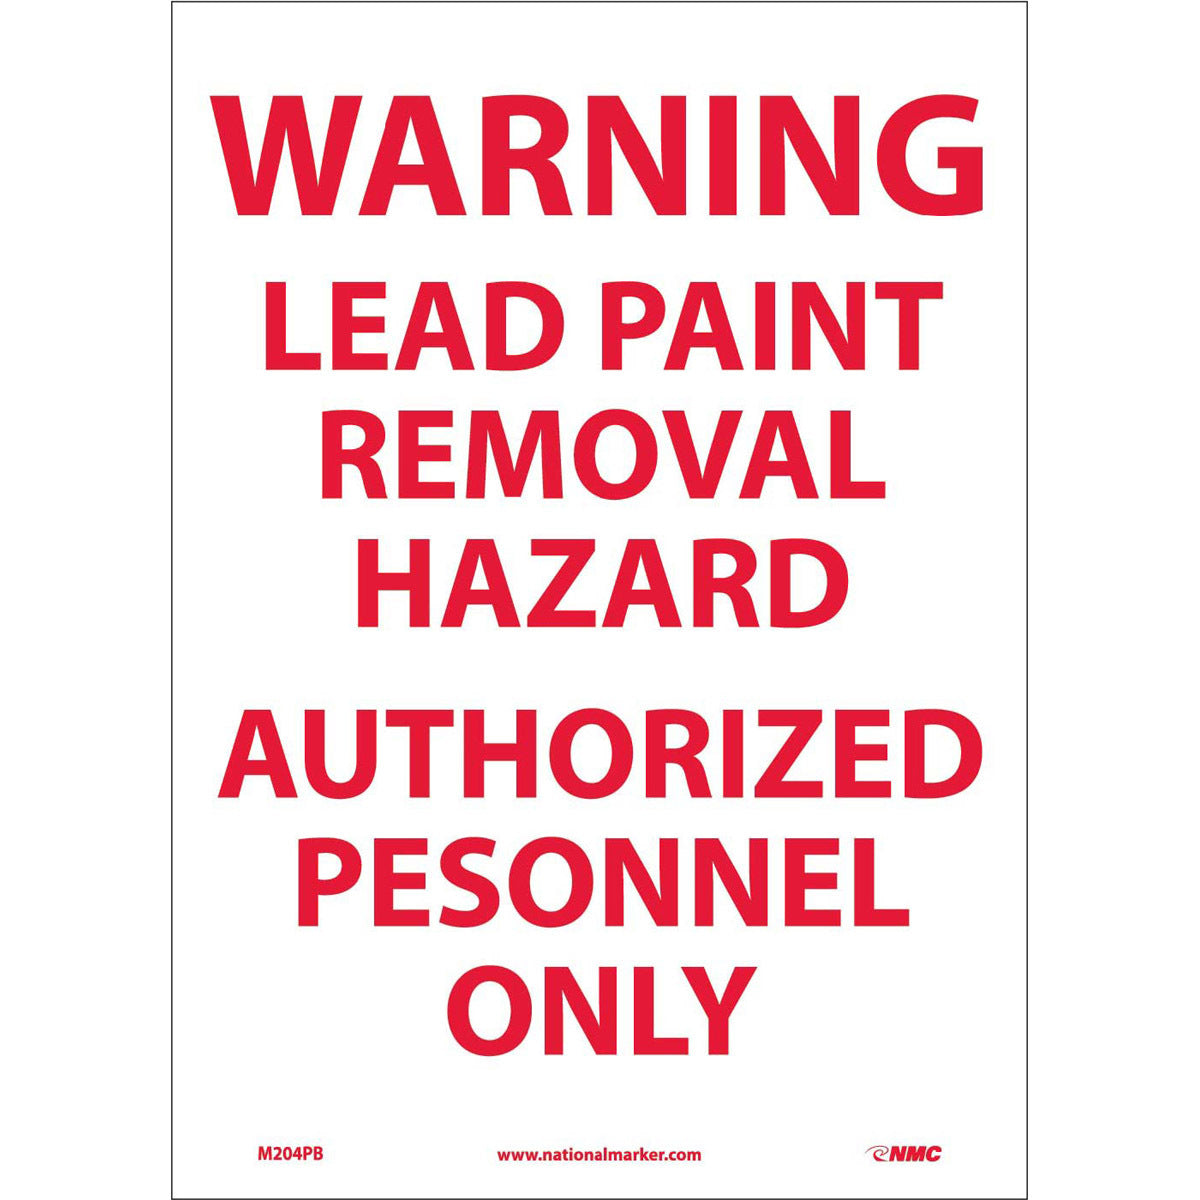 NM 14" X 10" White .0045" Pressure Sensitive Vinyl Chemicals And Hazardous Material Sign "WARNING LEAD PAINT REMOVAL HAZARD AUTHORIZED PERSONNEL ONLY"